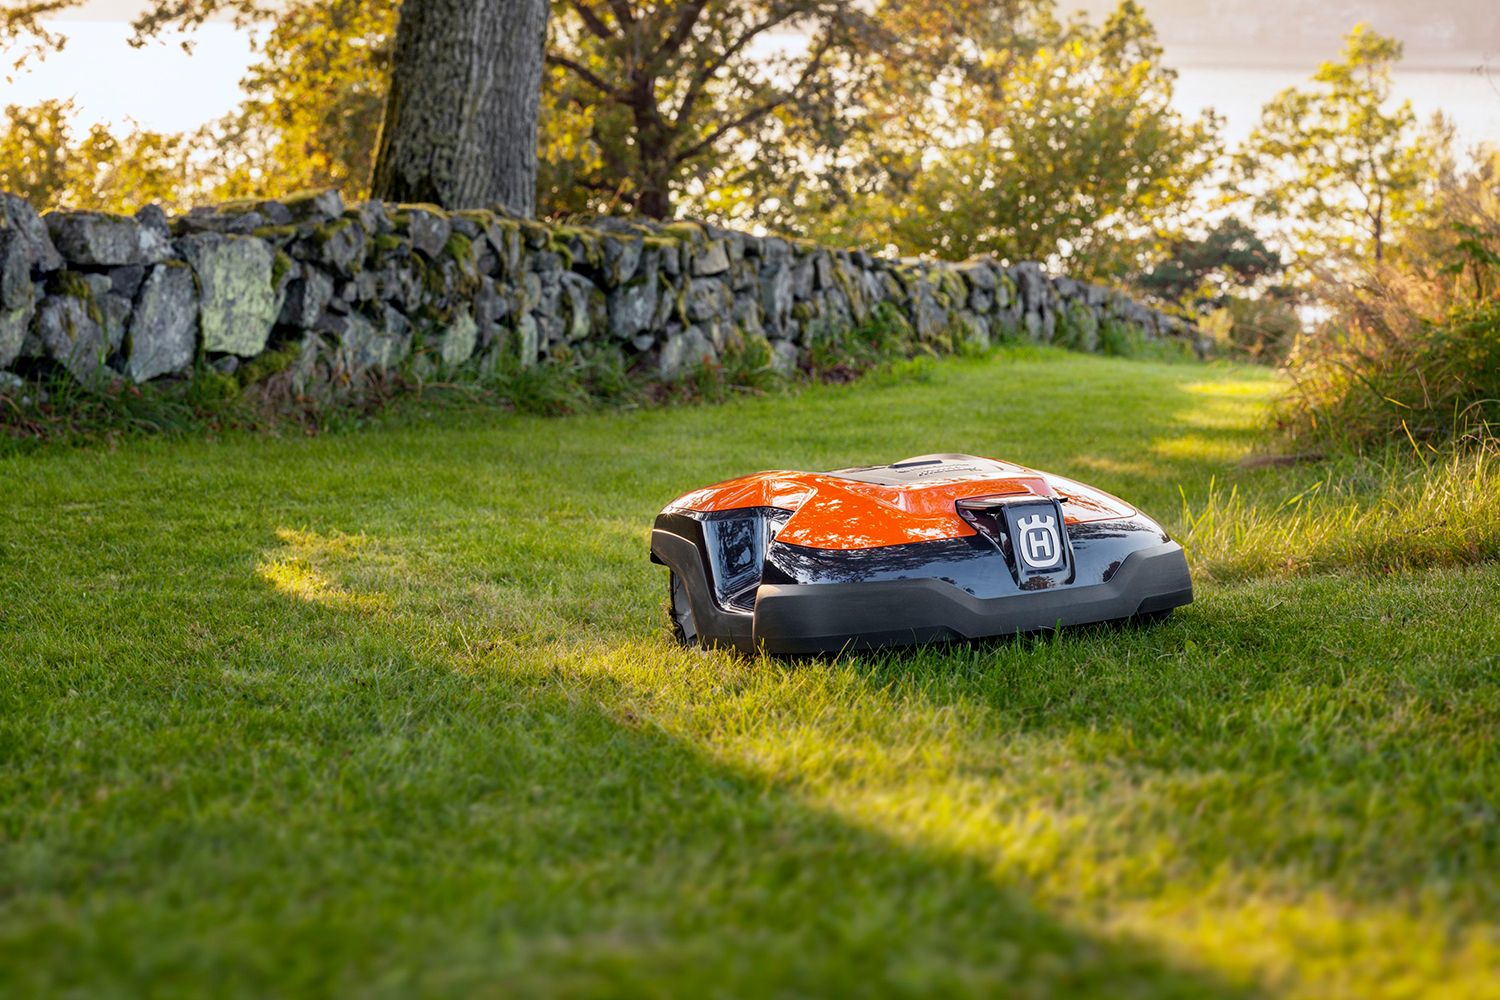 A robotic mower on the grass.